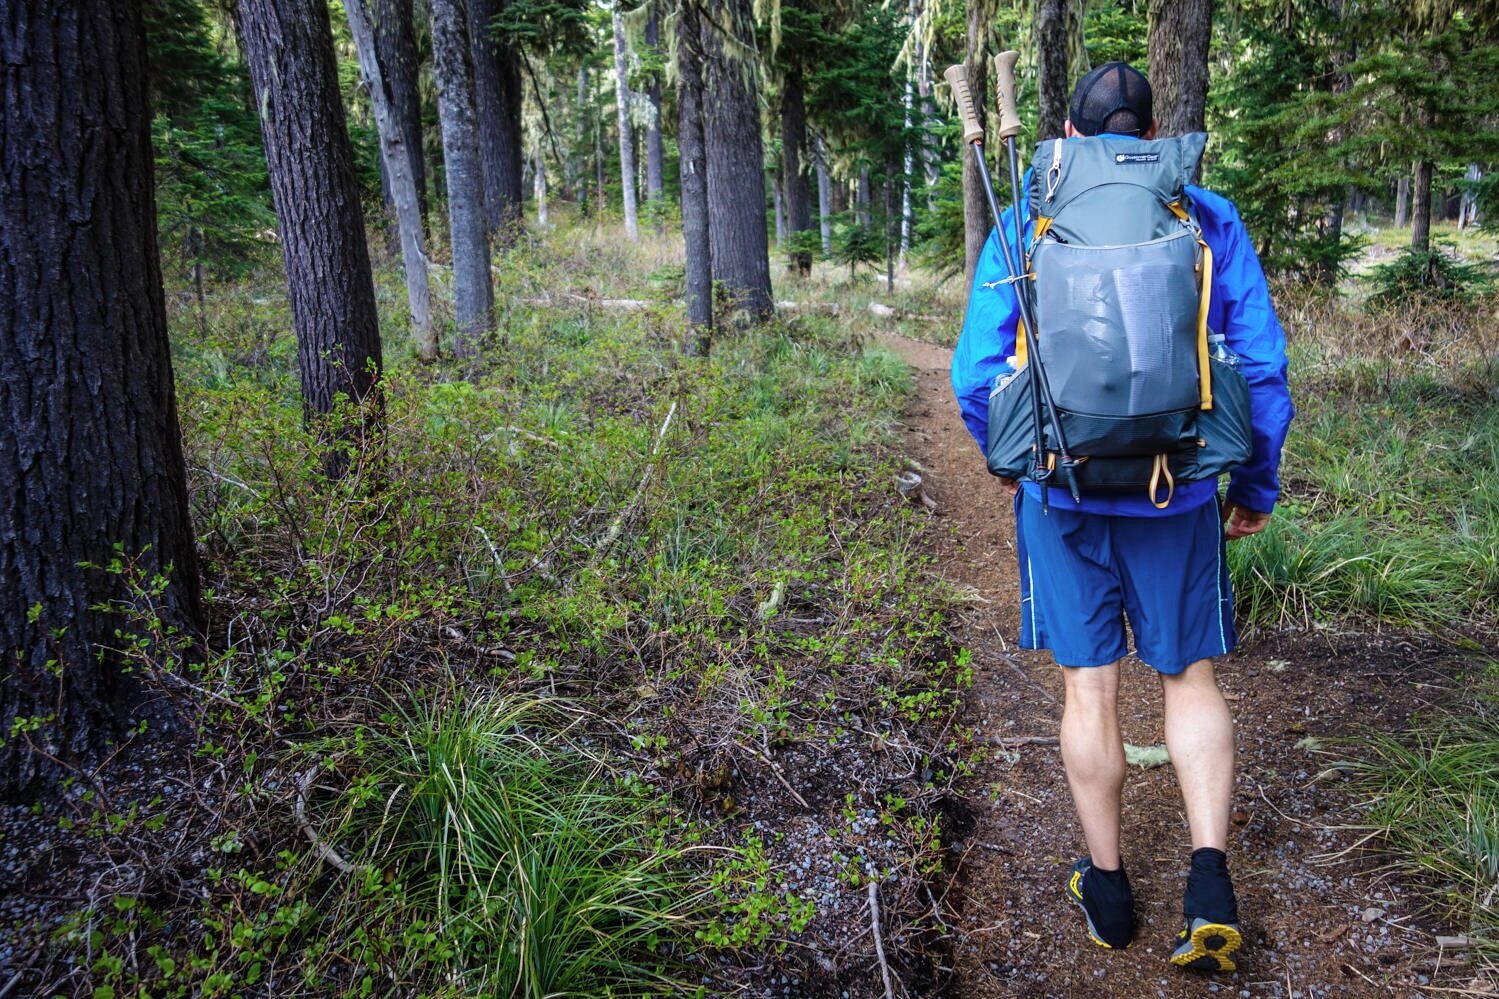 The Gorilla is one of our top picks from our Best Backpacking Backpacks guide.